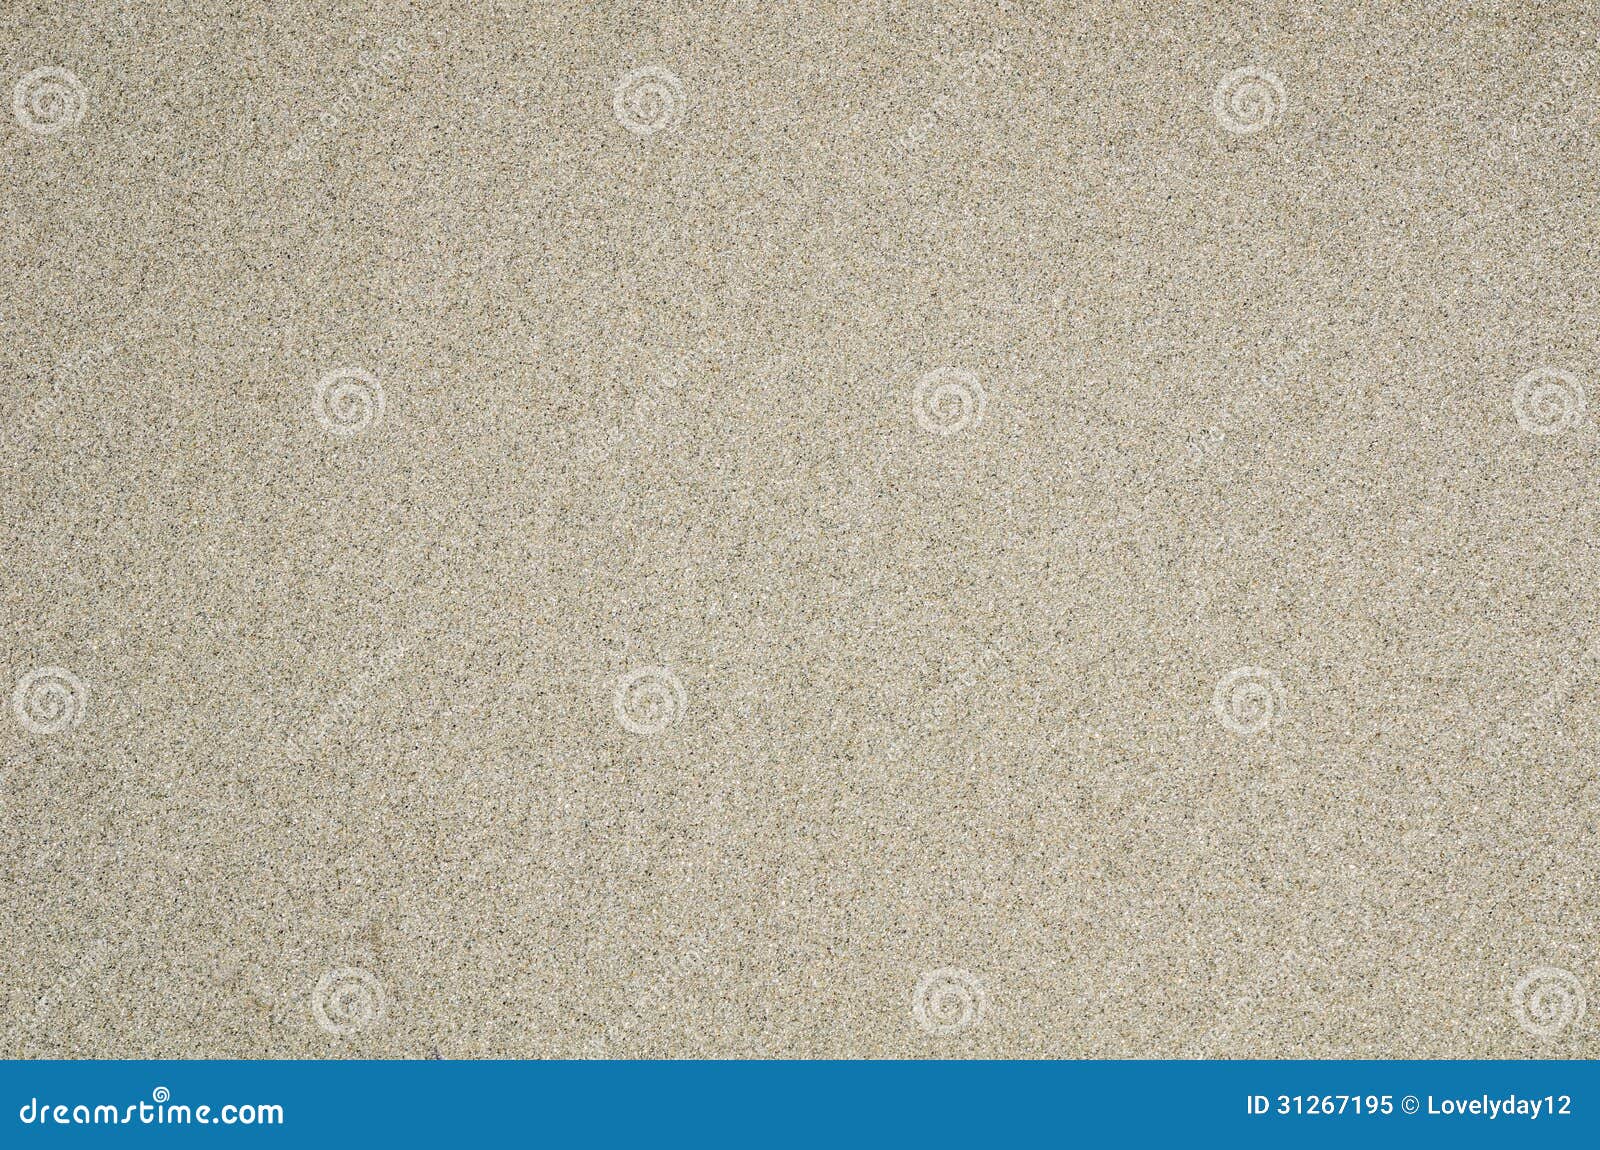 Sand beach background stock image. Image of golden, space - 31267195